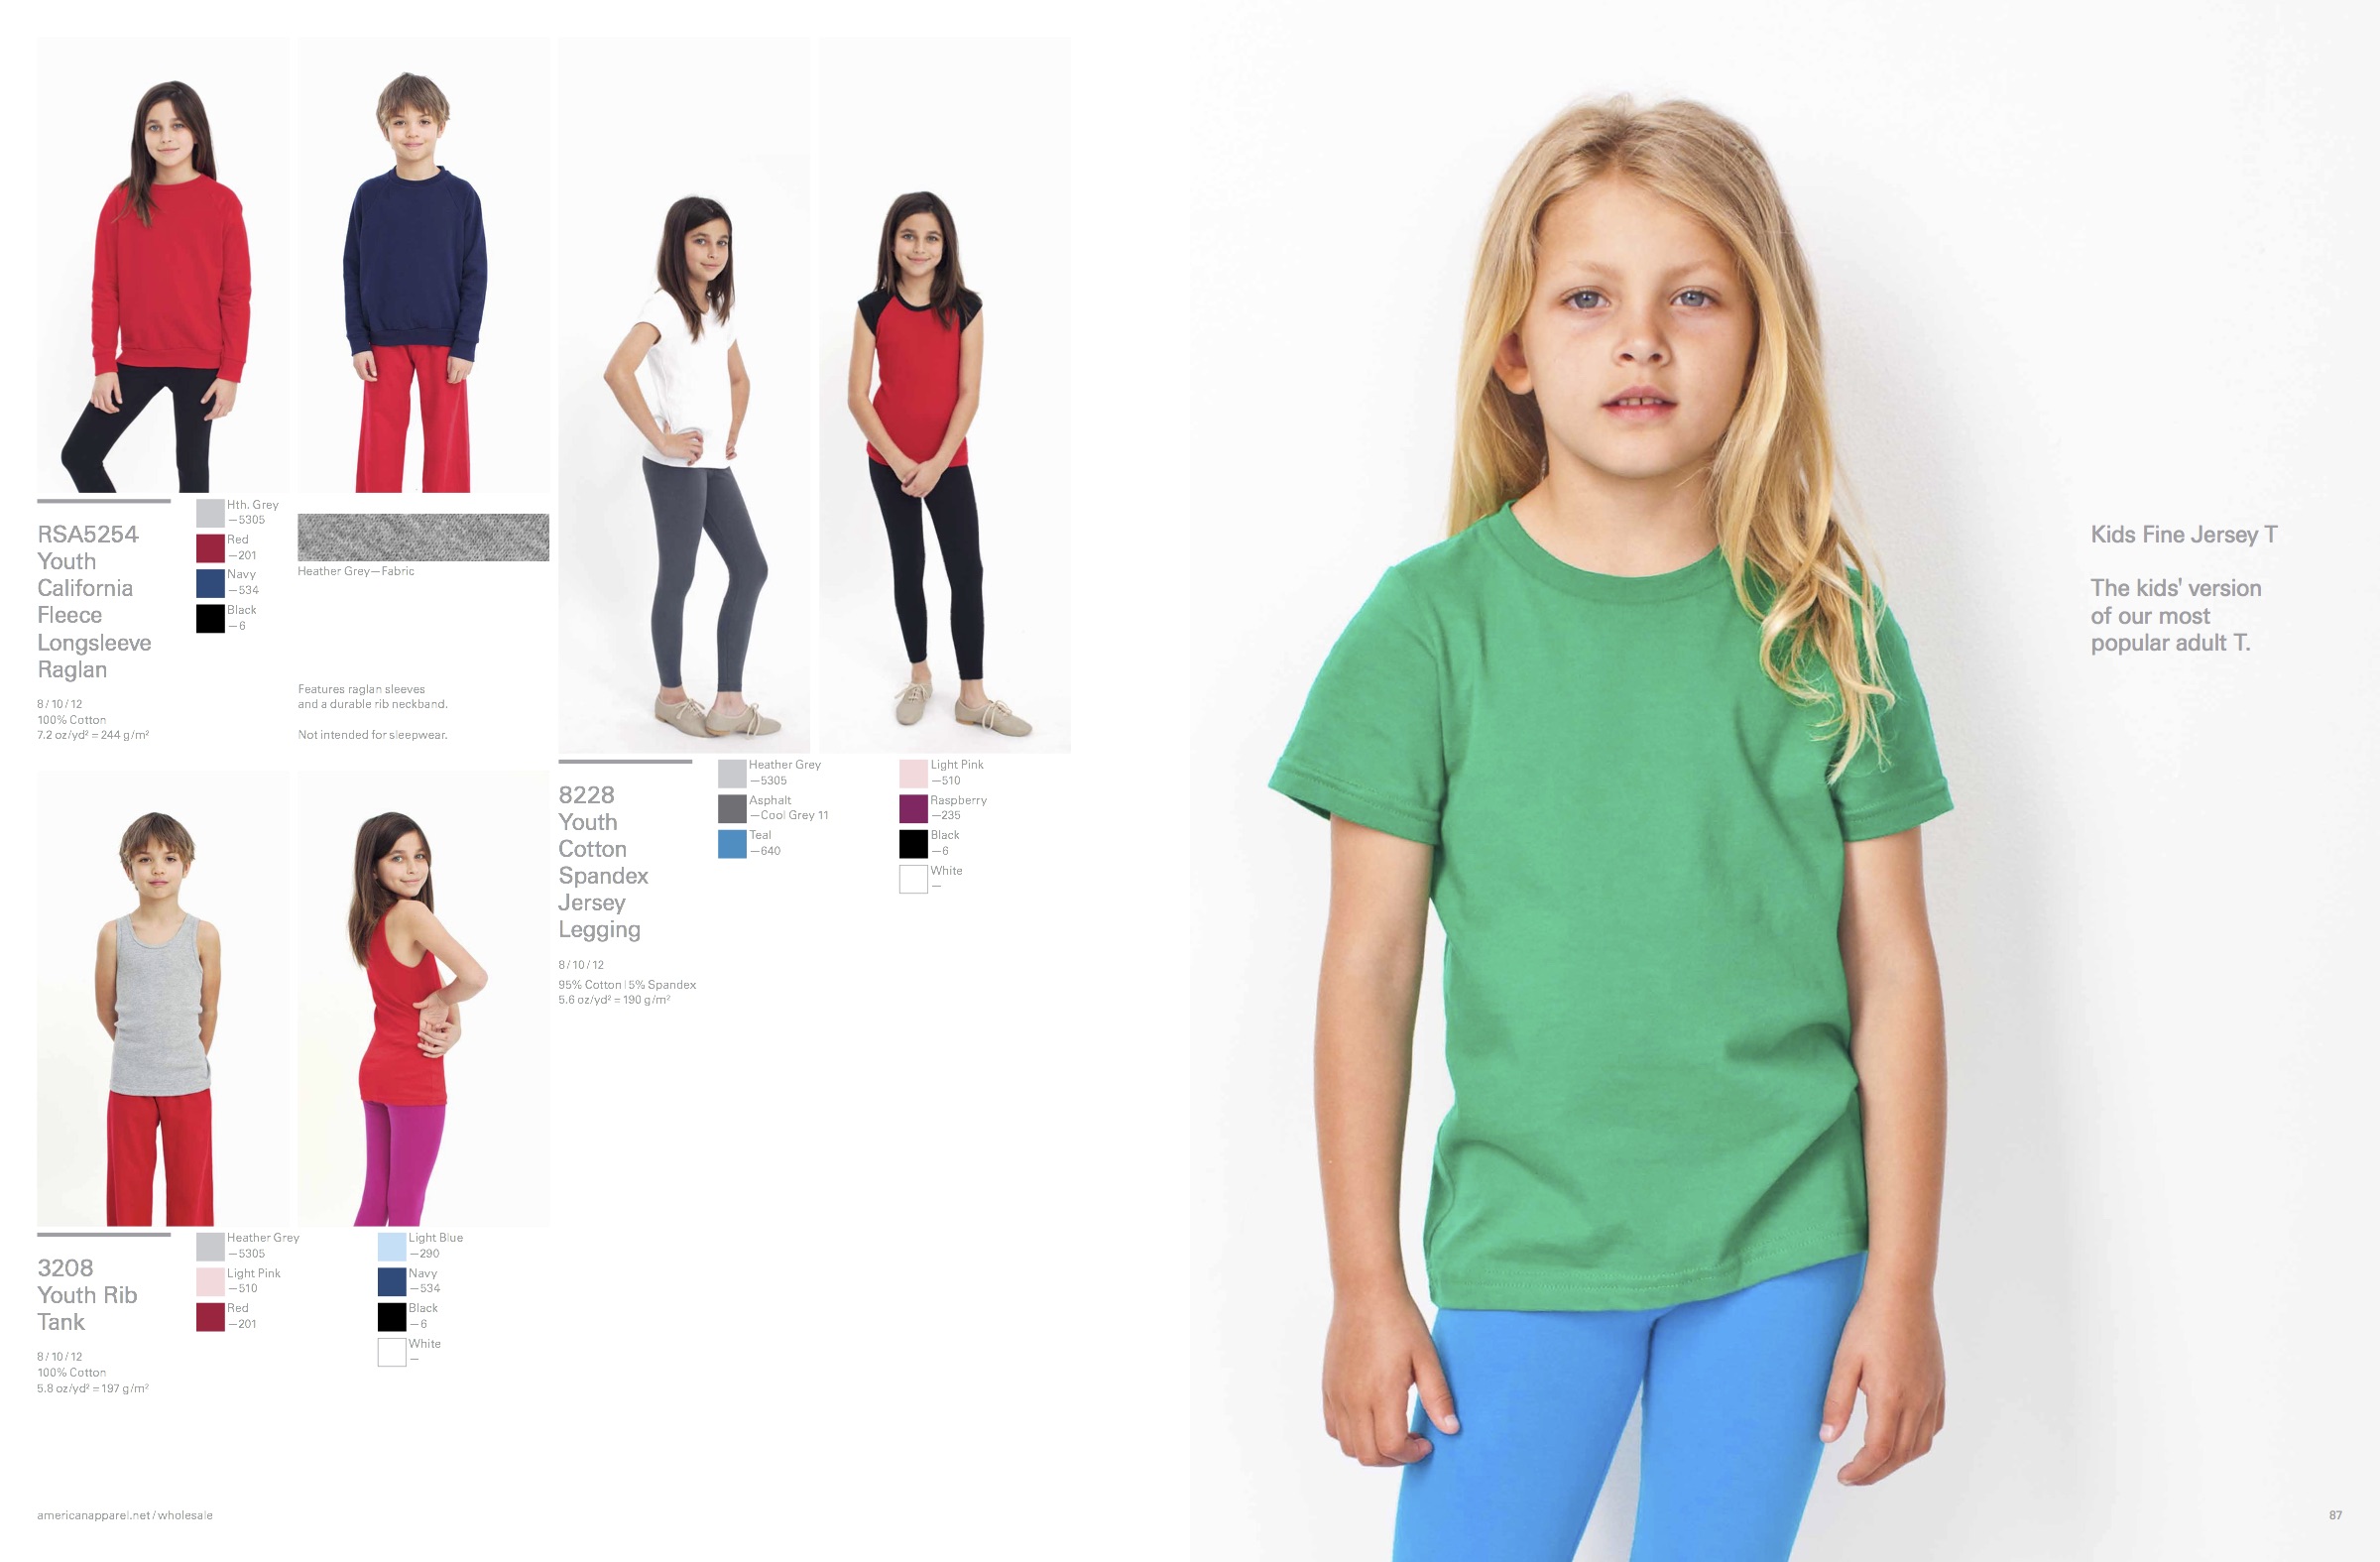 Featured in a full page (right), Ryan models the classic American Apparel Kids Fine Jersey T in their 2011 international wholesale catalogue; a coveted role for any model.